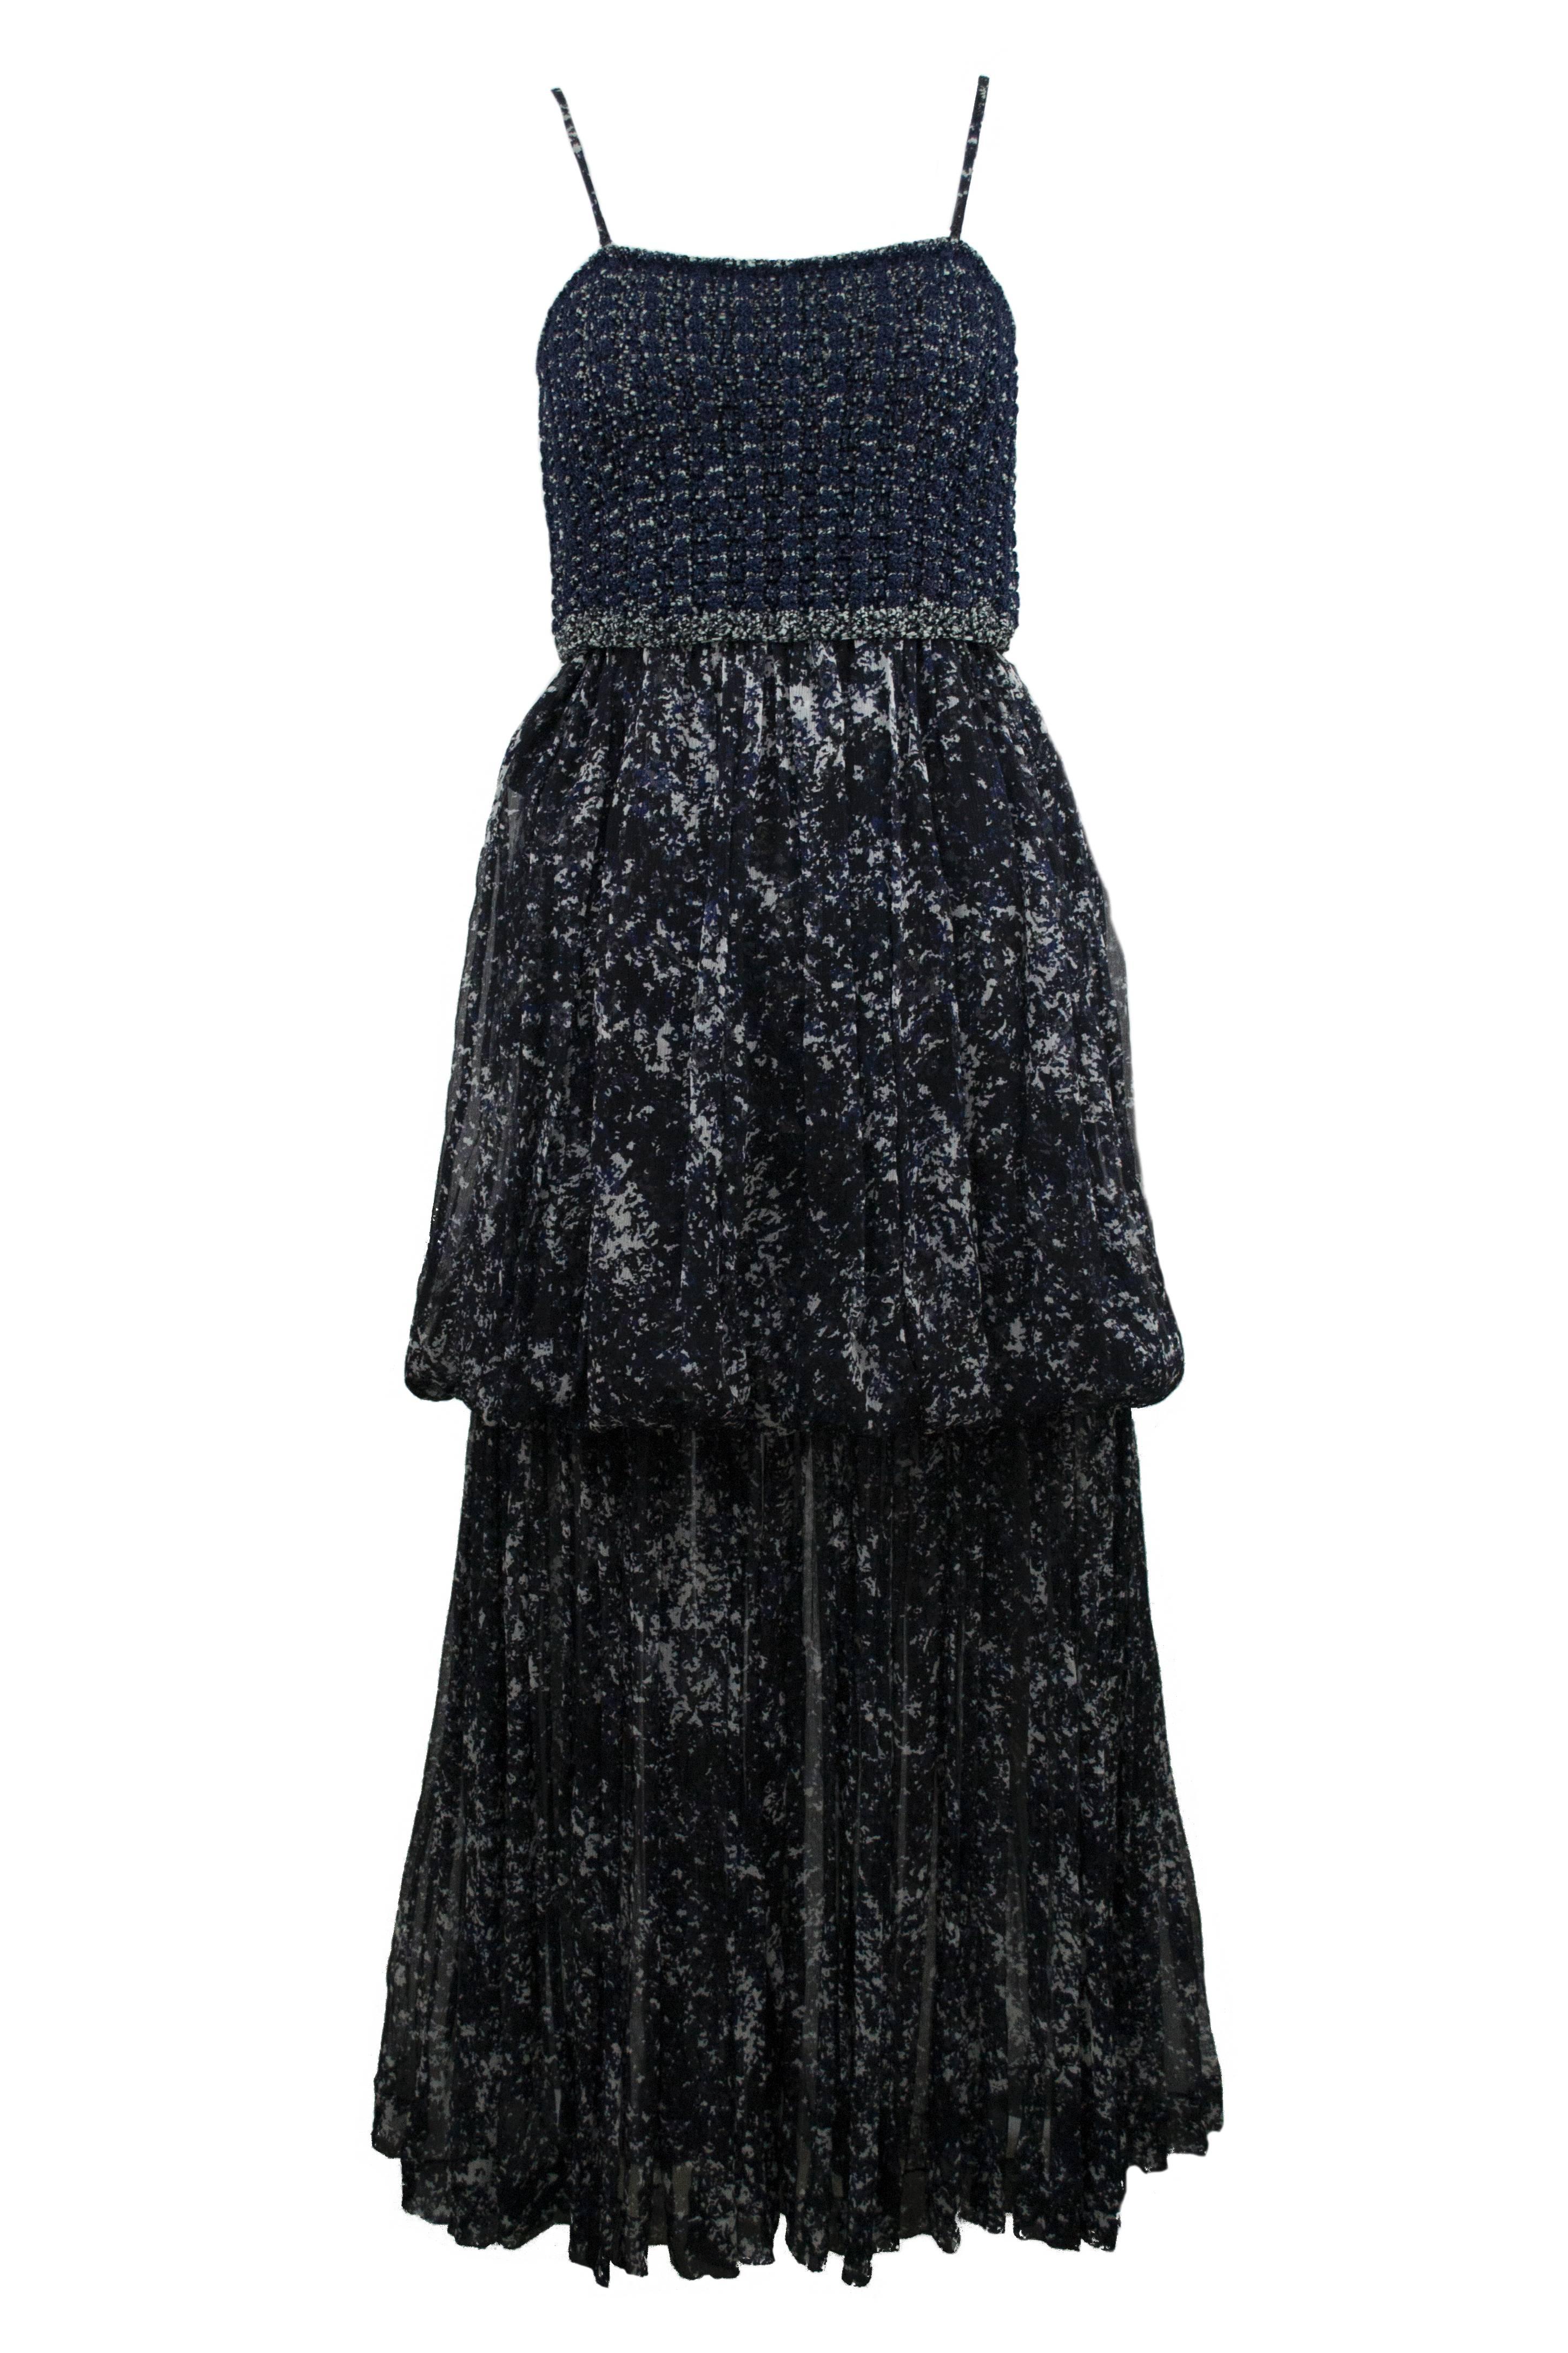 Chanel limited edition silk navy and cream chiffon gown with matching print shawl in size 34. Originally retailed $9,000. Bodice is a knit cotton and viscose boucle with a multi layer chiffon skirt starting at the true waist. Zip back closure. Shawl